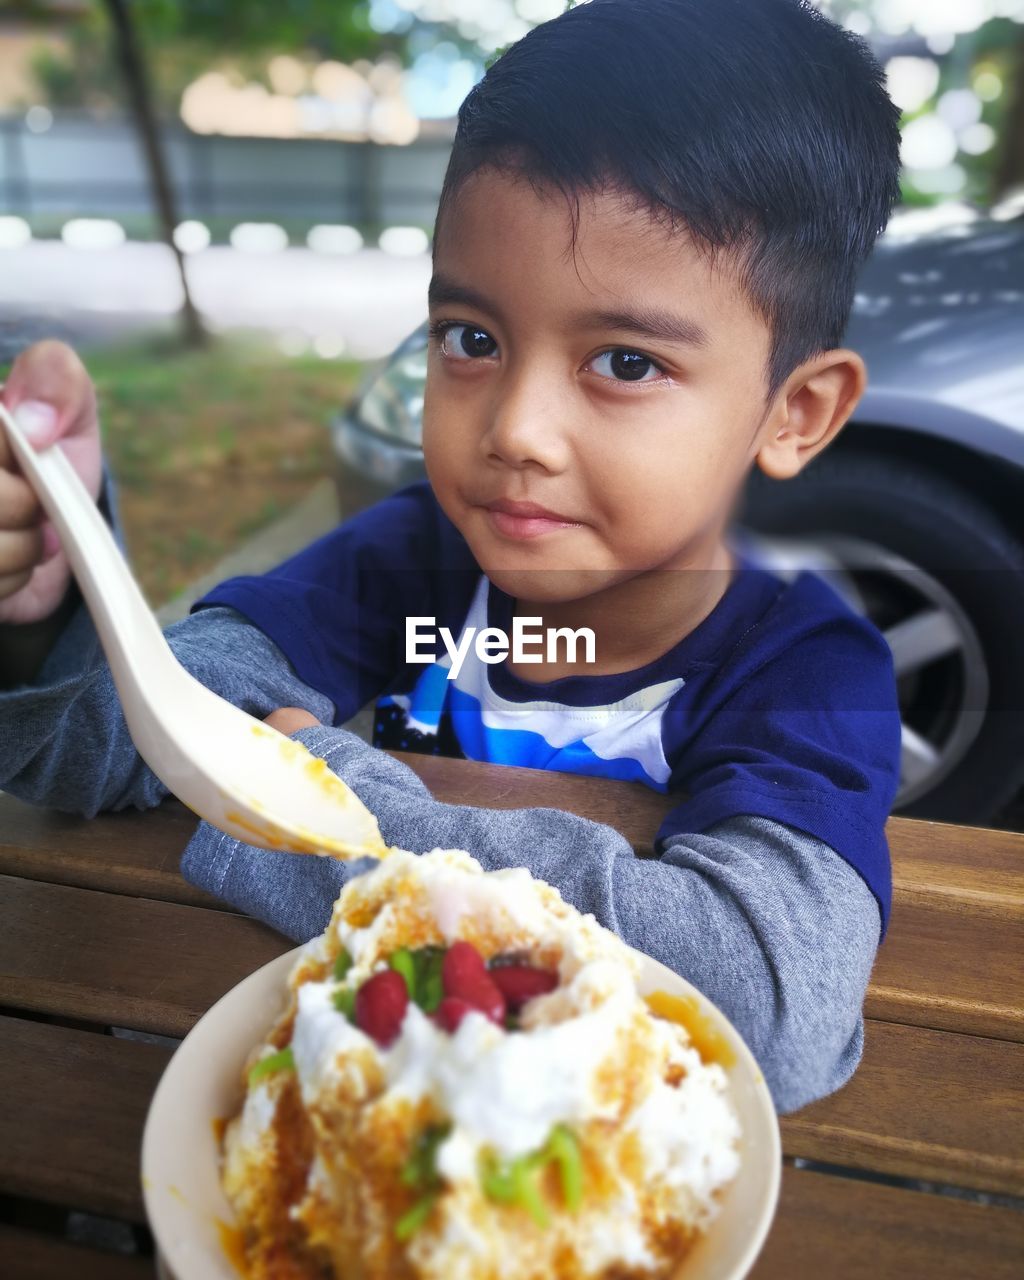 Portrait of boy eating food at table outdoors